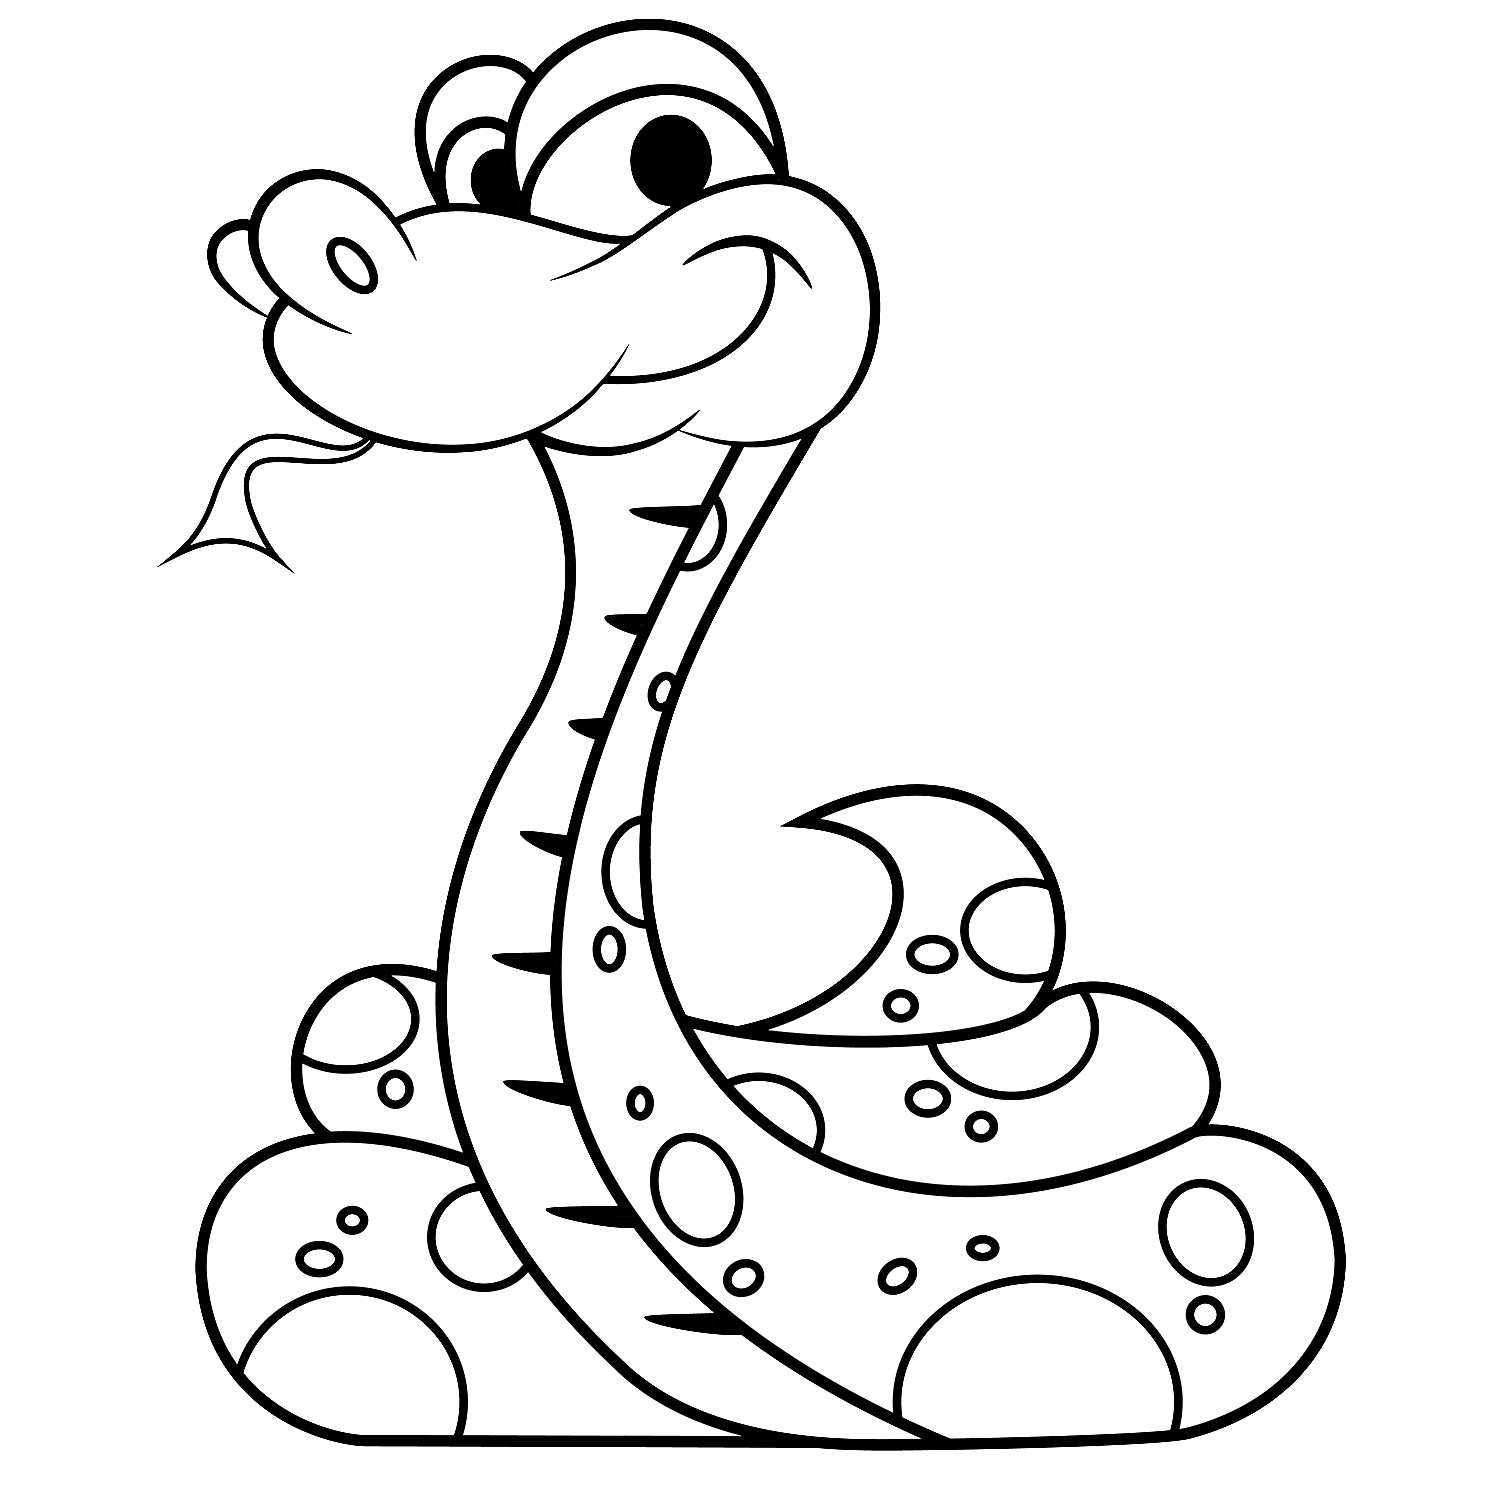 Snake Coloring Pages Printable
 Coloring Pages Snakes Coloring Pages Free and Printable